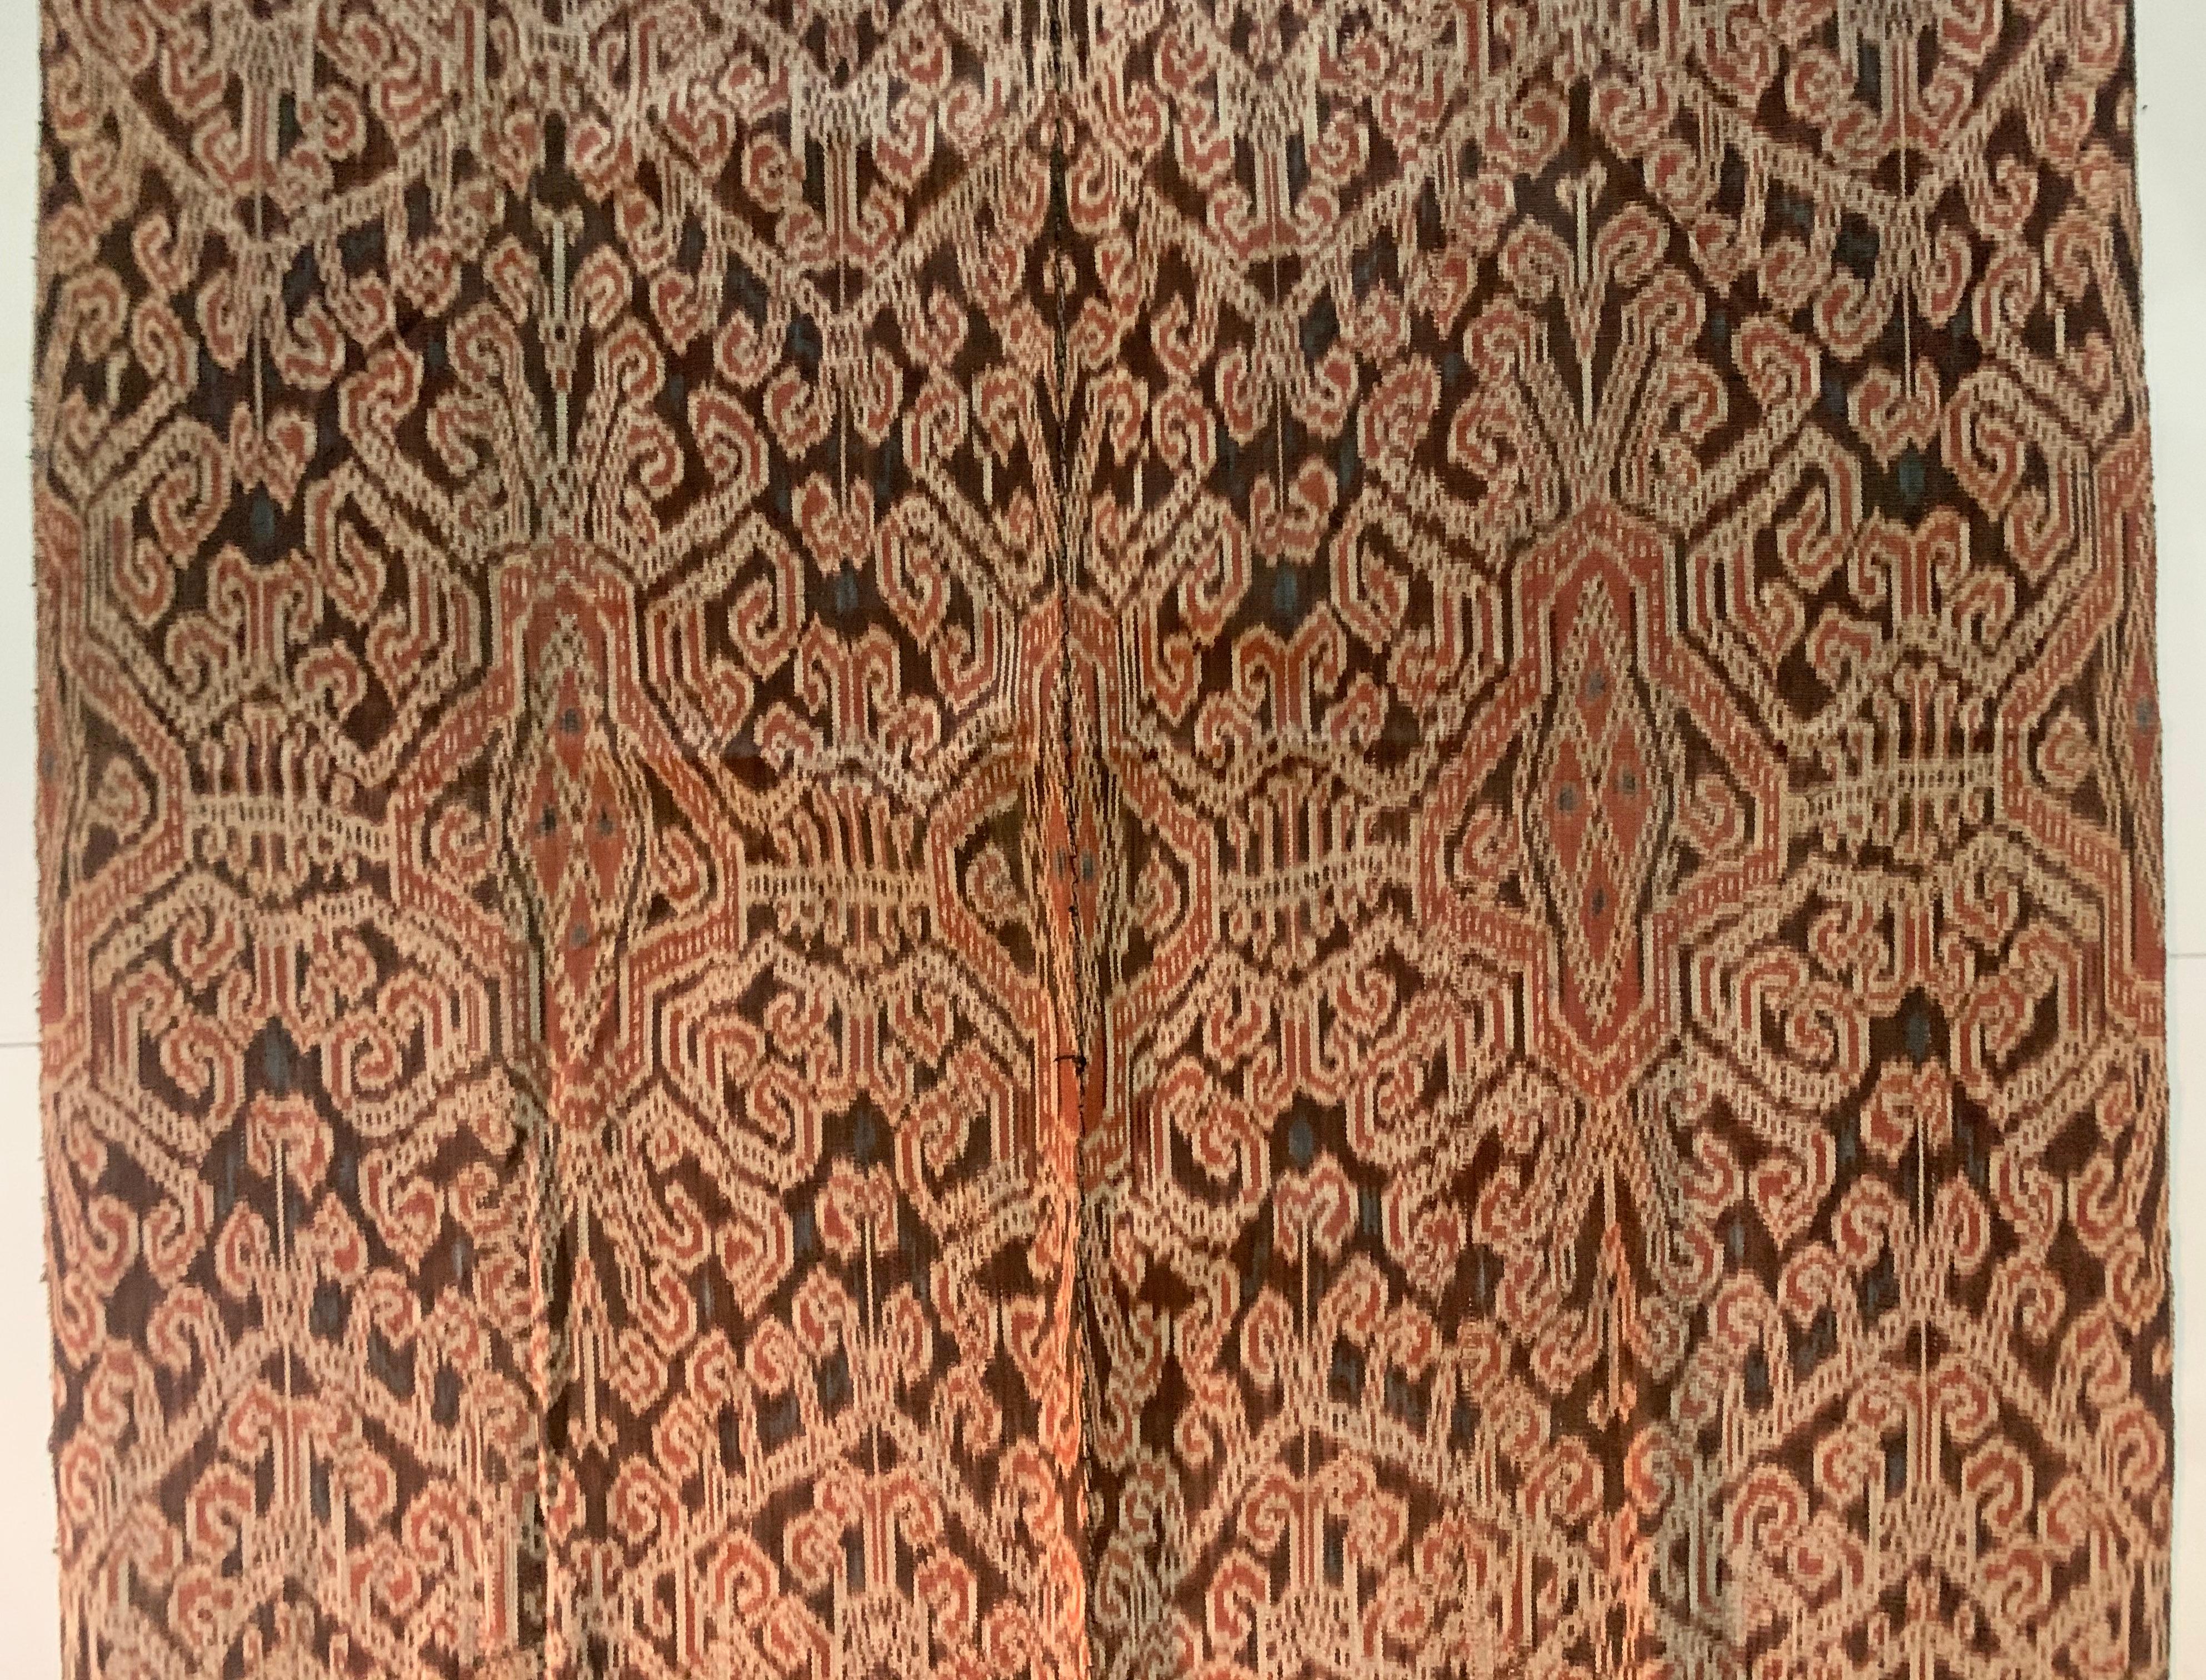 Mid-20th Century Ikat Textile from Sumba Island with Stunning Tribal Motifs, Indonesia